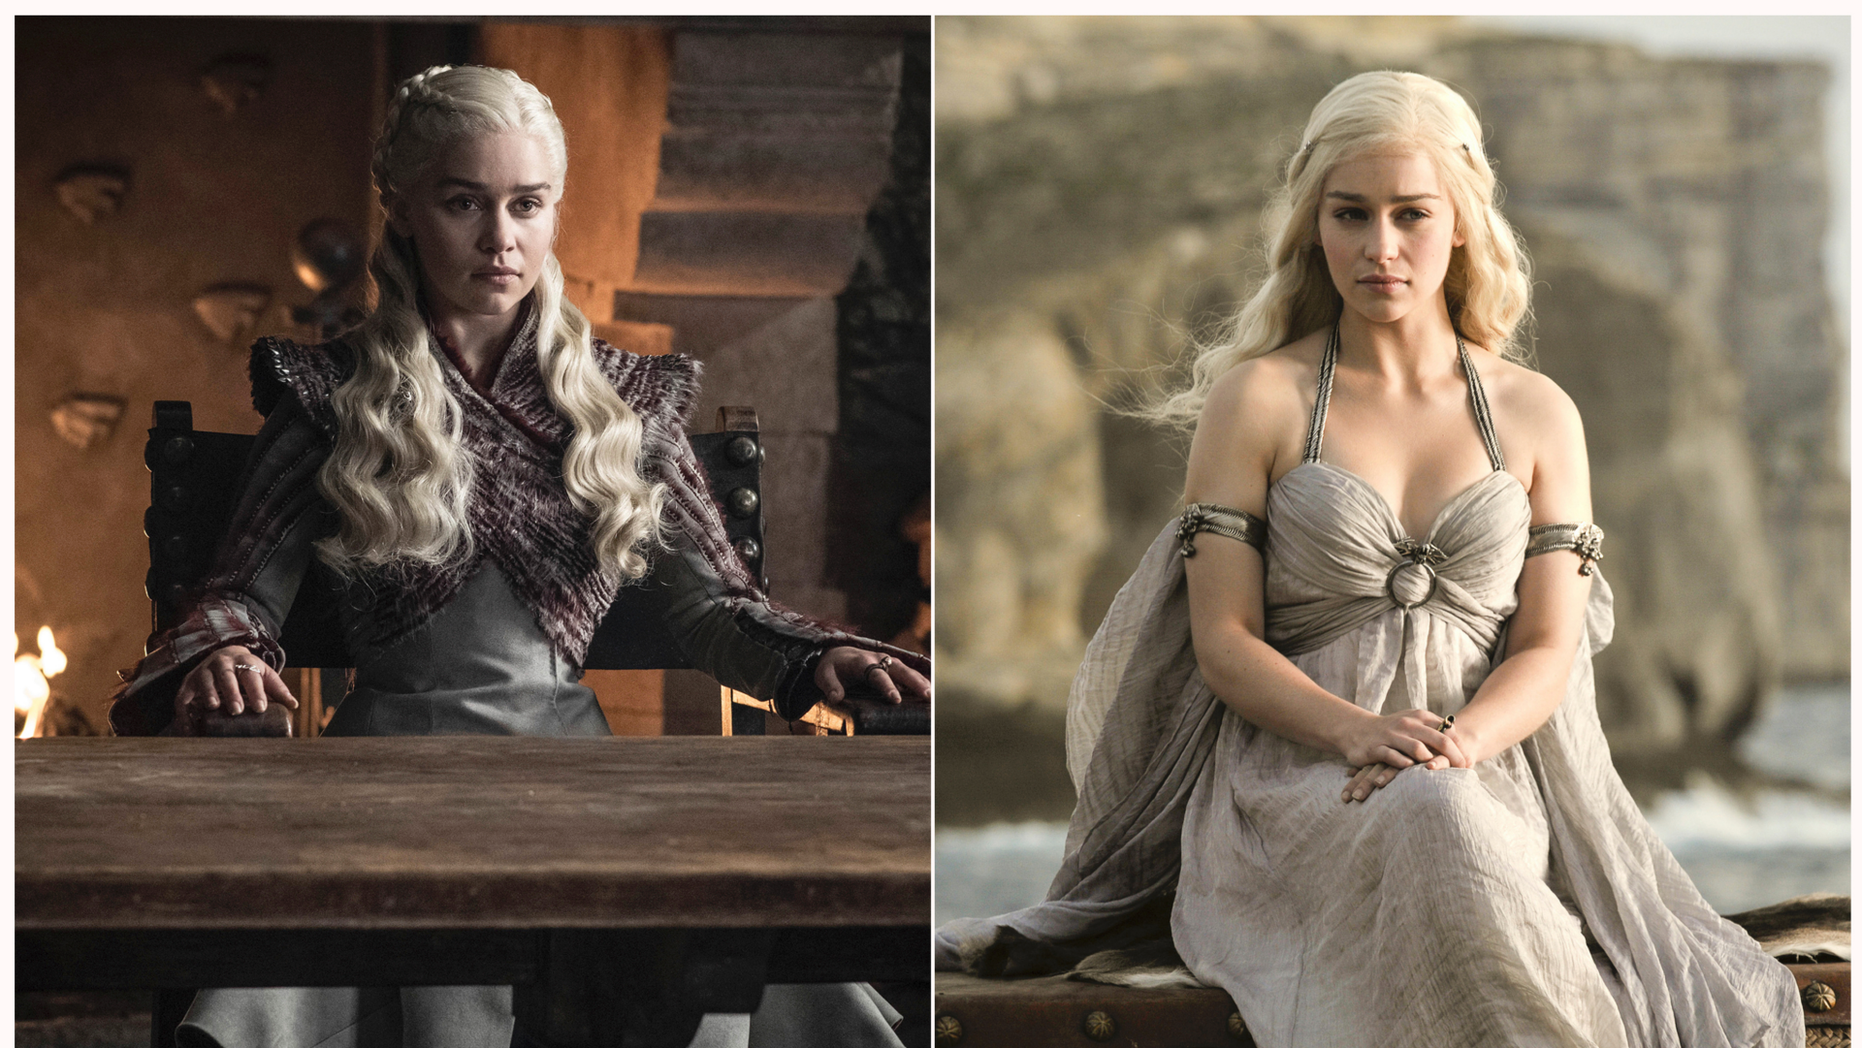 This combined picture of images published by HBO shows Emilia Clarke portraying Daenerys Targaryen in 